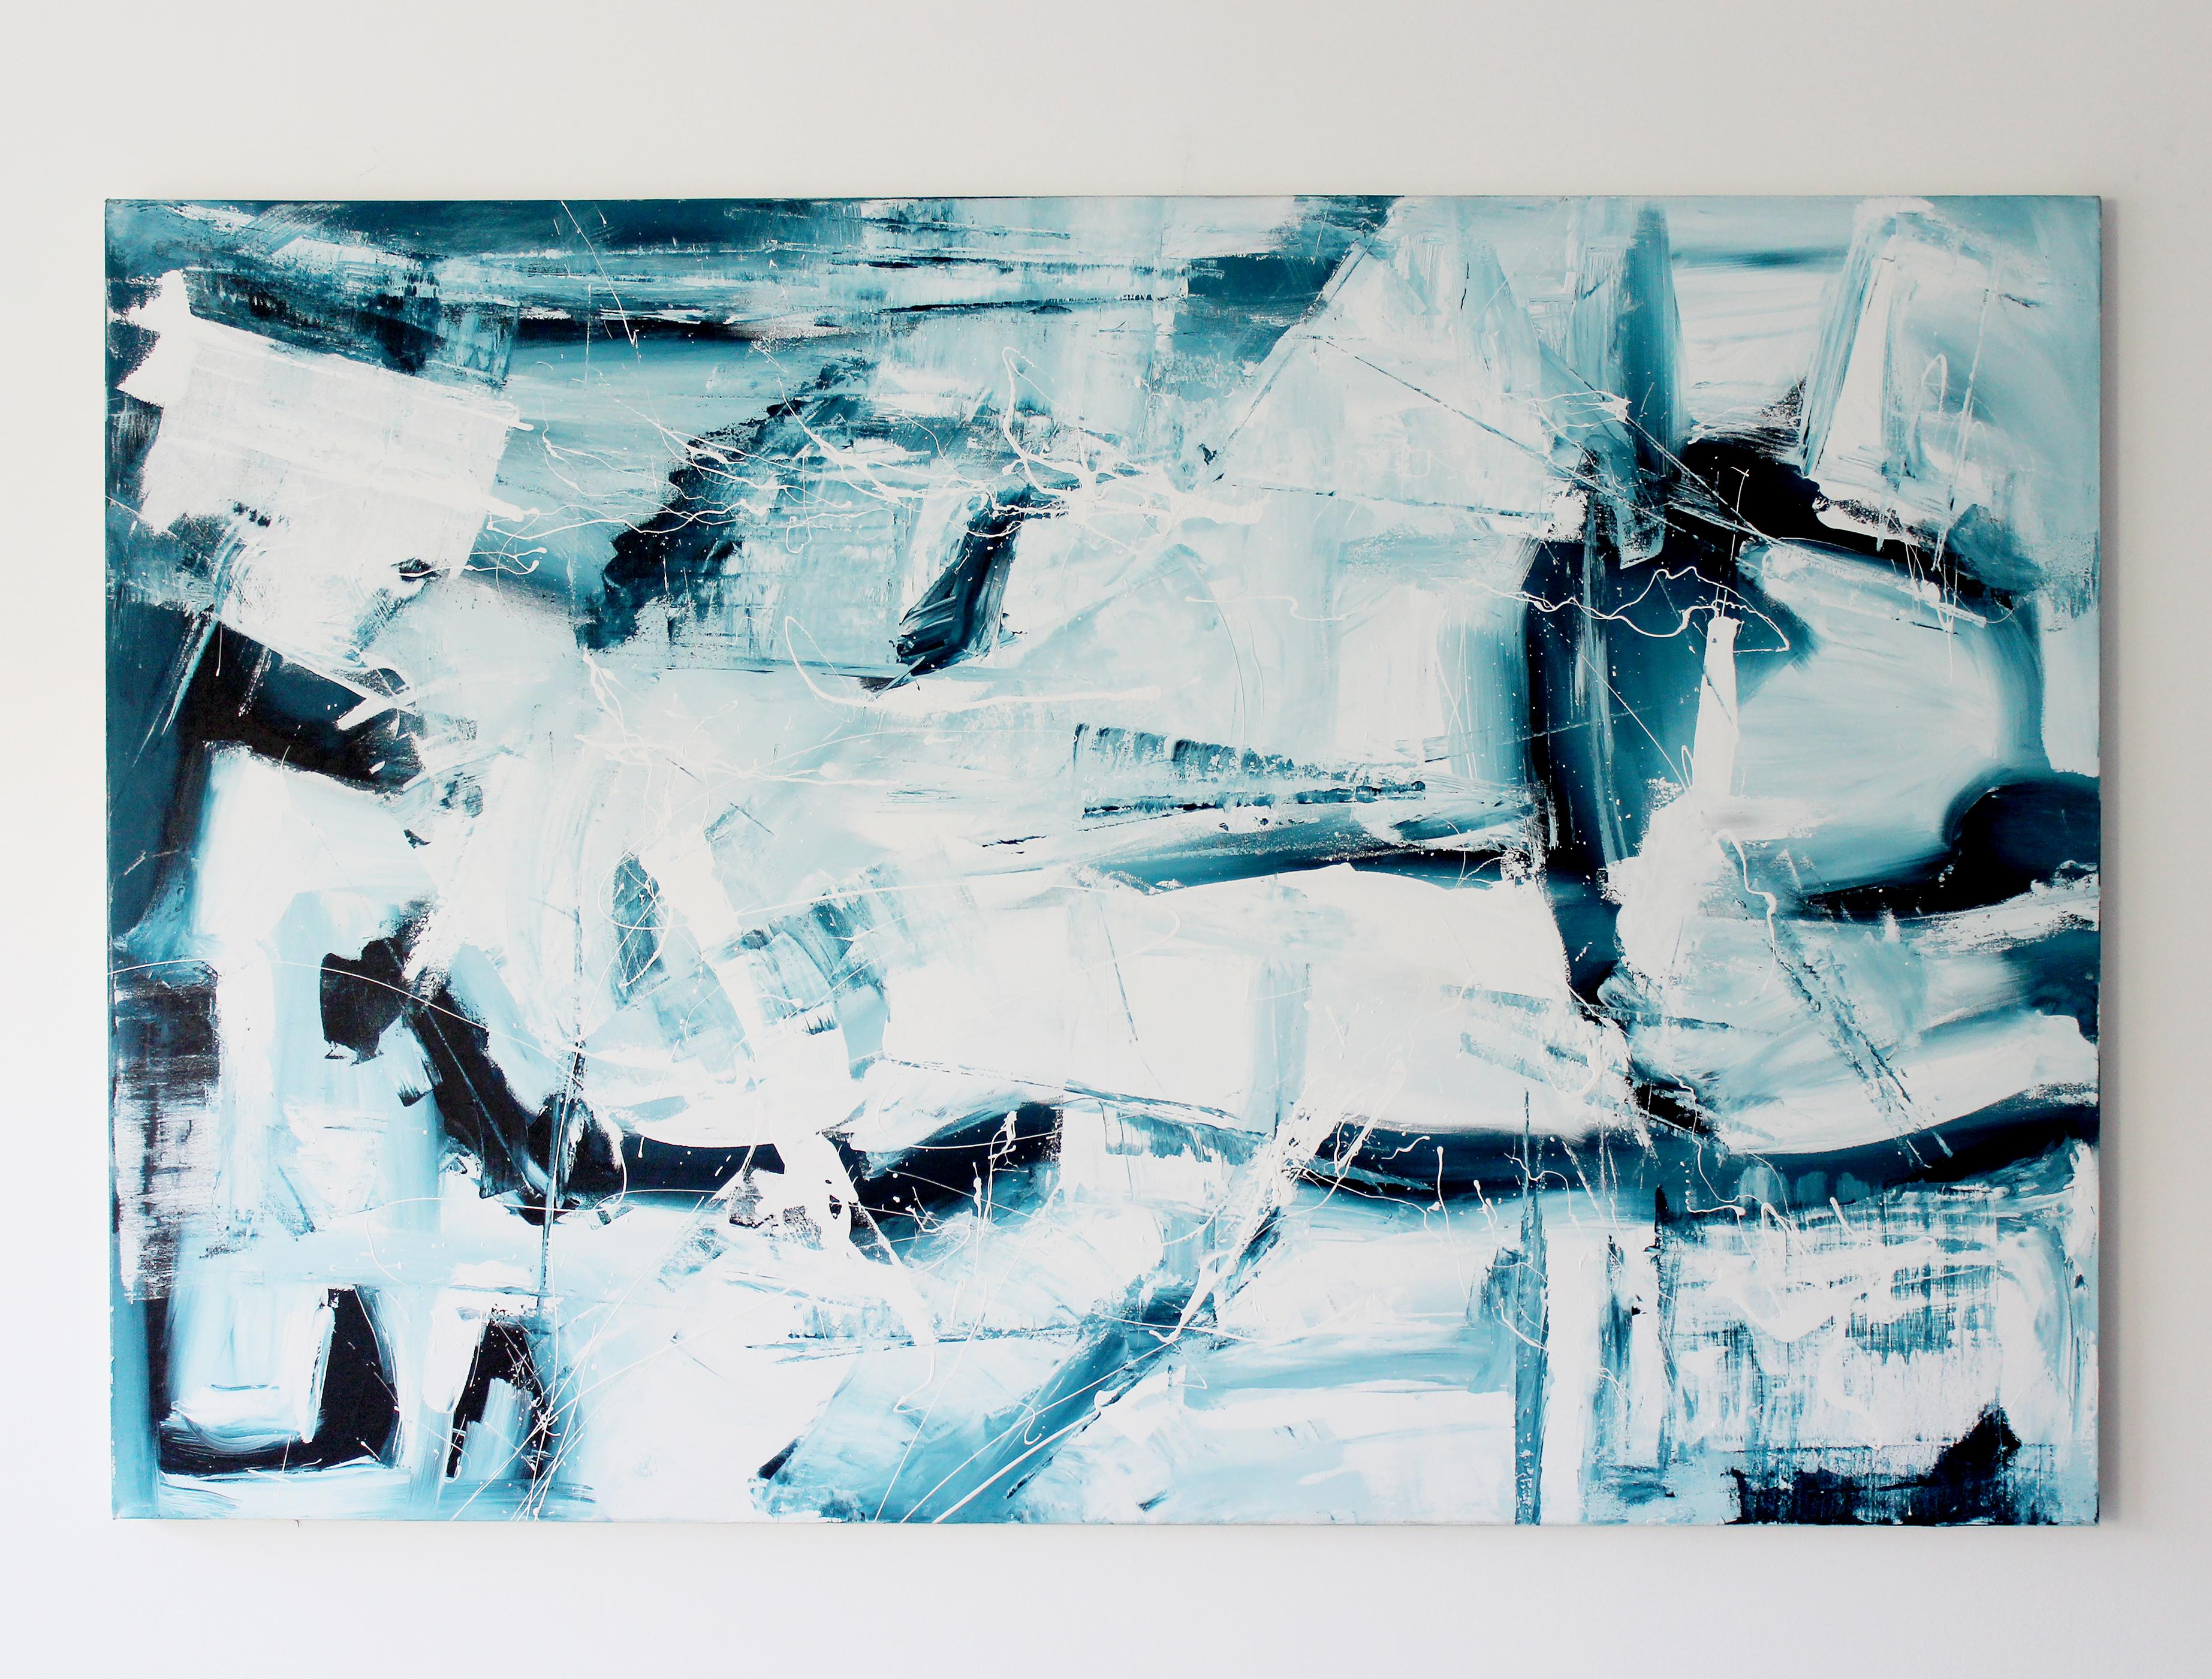 Jacqueline Jandrell Abstract Painting - "Shattered" - Acrylic on Canvas